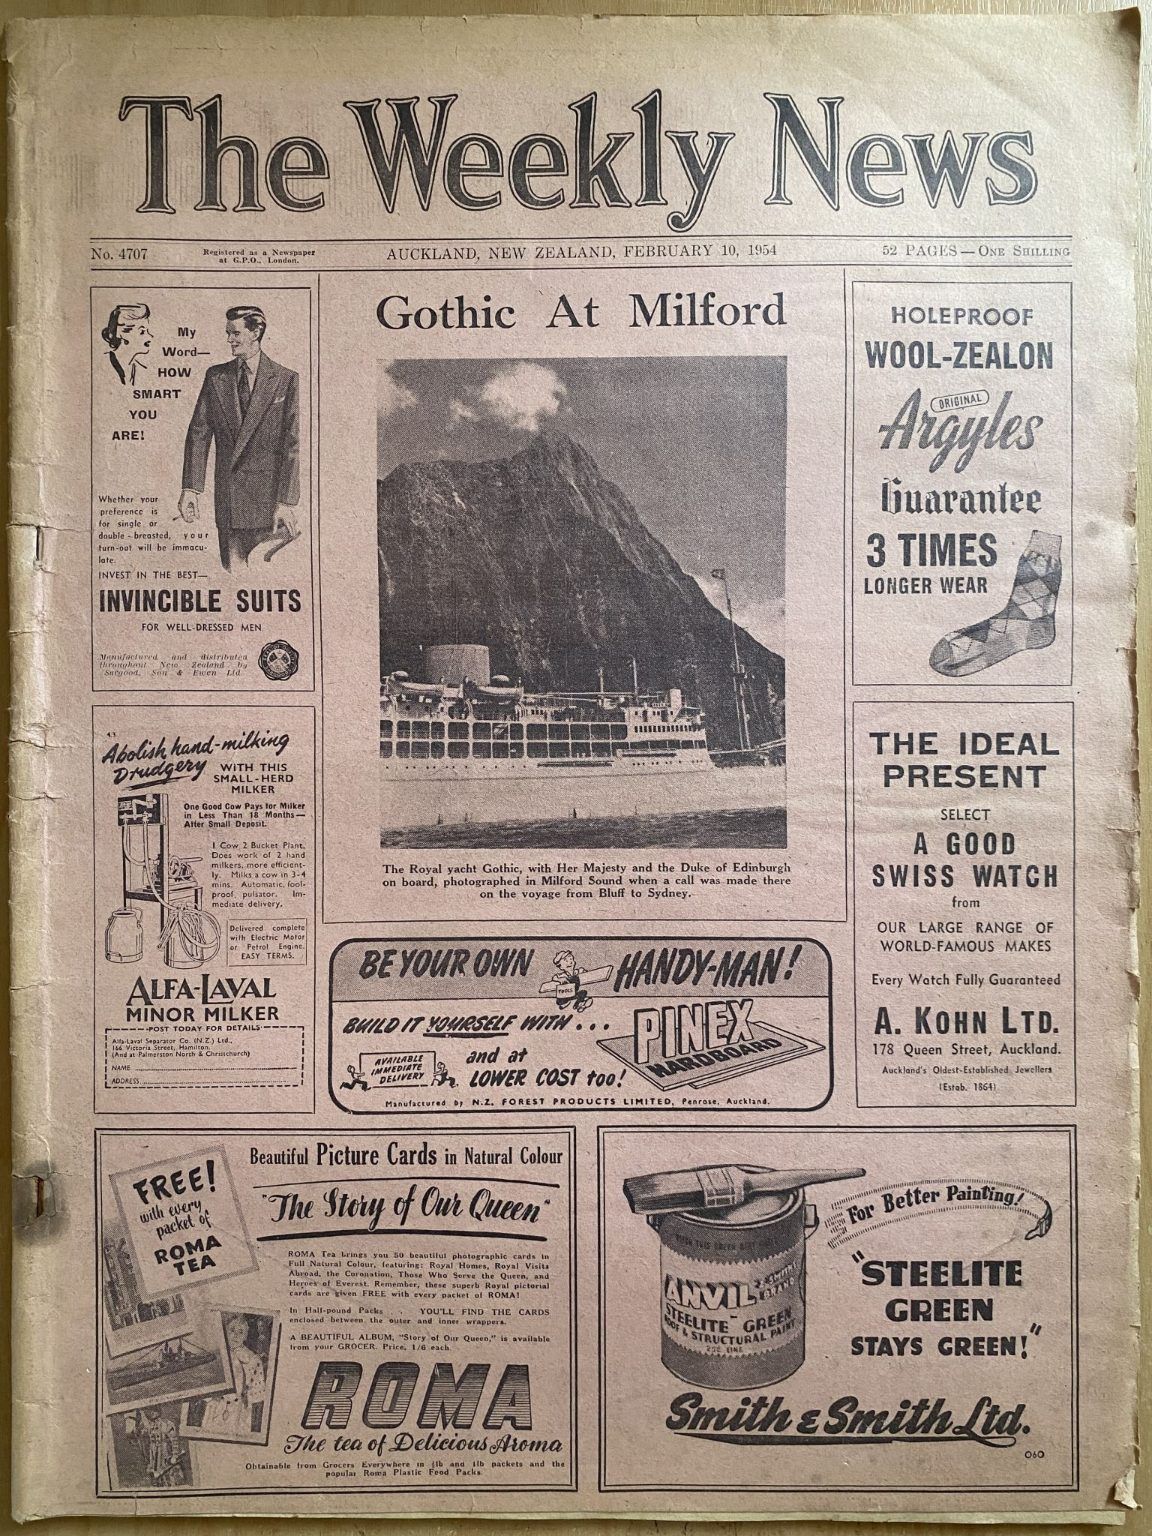 OLD NEWSPAPER: The Weekly News - No. 4707, 10 February 1954